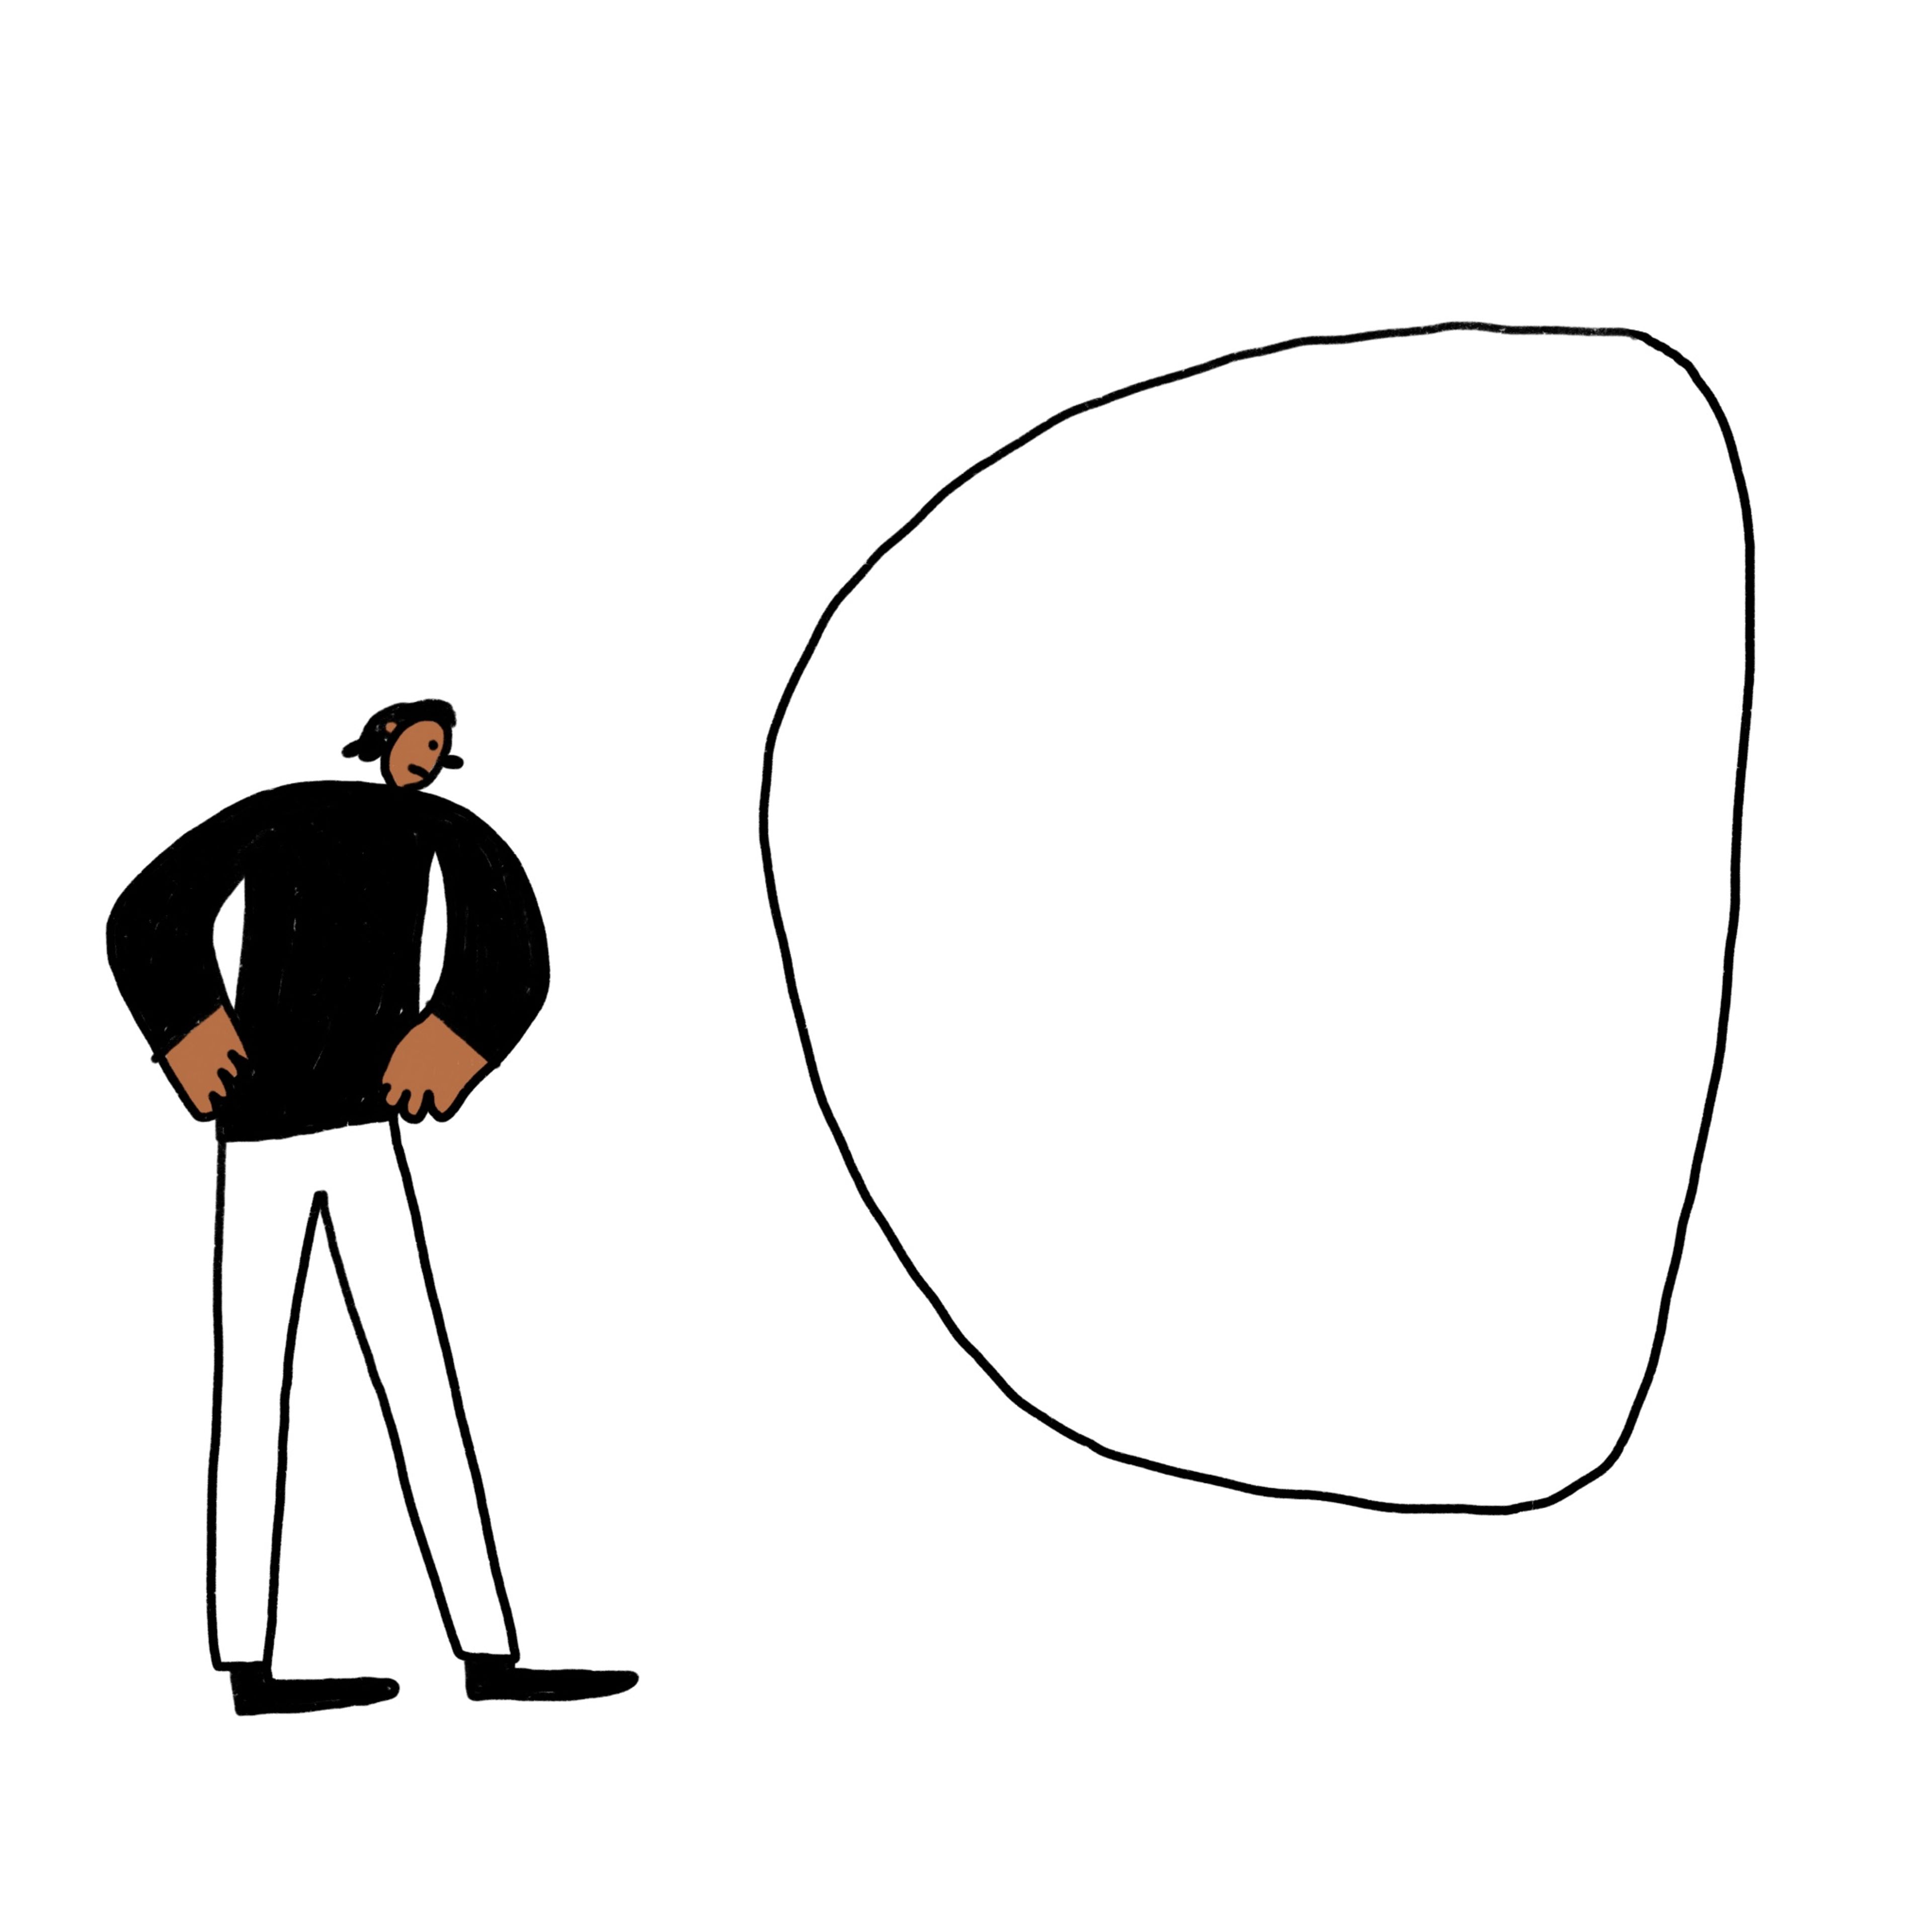 Illustration of a person standing infront of a canvas